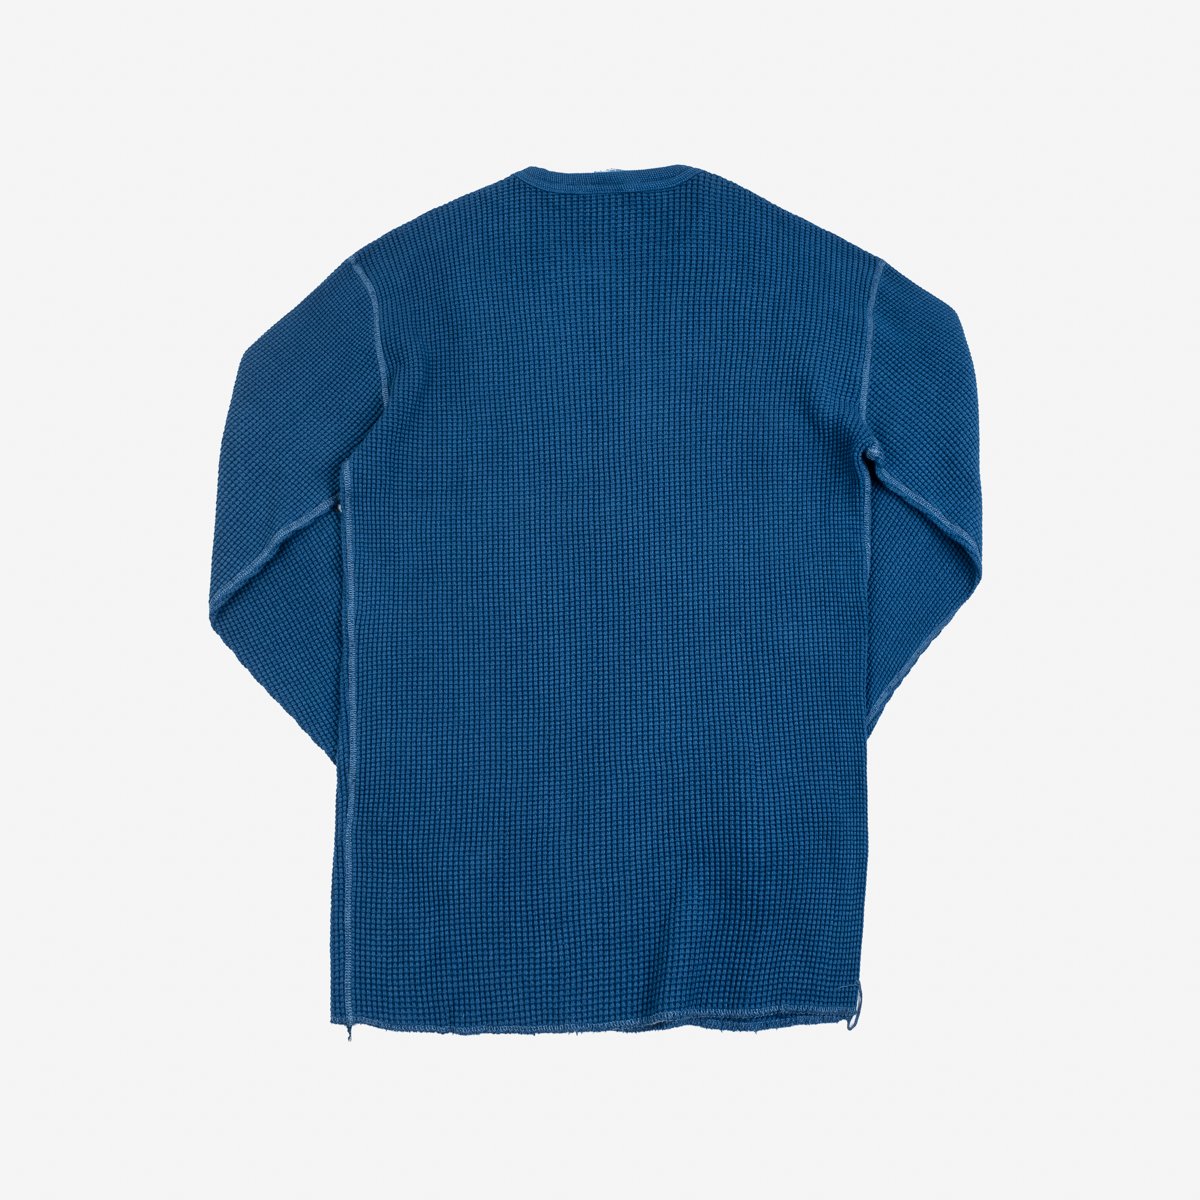 Iron Heart IHTL-1301-IND Waffle Knit Long Sleeved Crew Neck Thermal Top - Indigo Dyed